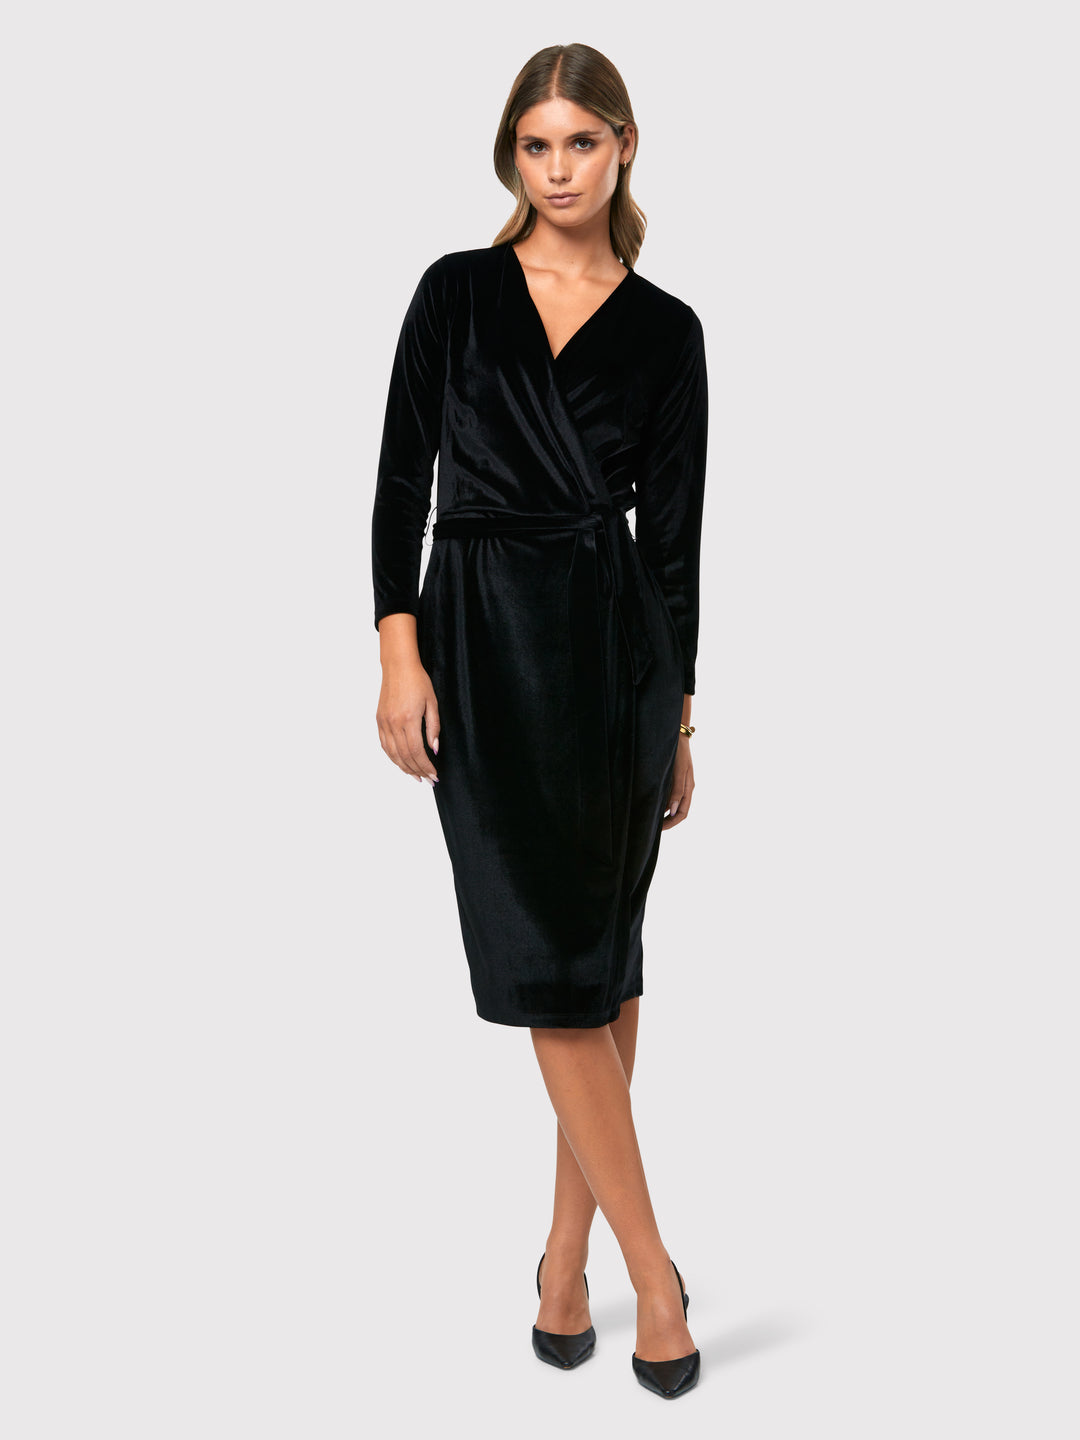 Introducing the Jordan Black Velvet Dress, a must-have addition to your winter wardrobe. This versatile dress combines luxurious stretch velvet a flattering v-neckline, offering a perfect blend of warmth, sophistication, and style. The faux wrap design creates a feminine silhouette that transitions seamlessly from desk to dinner, while the detachable belt allows you to customize your look to suit any occasion. Made with sumptuous velvet fabric.